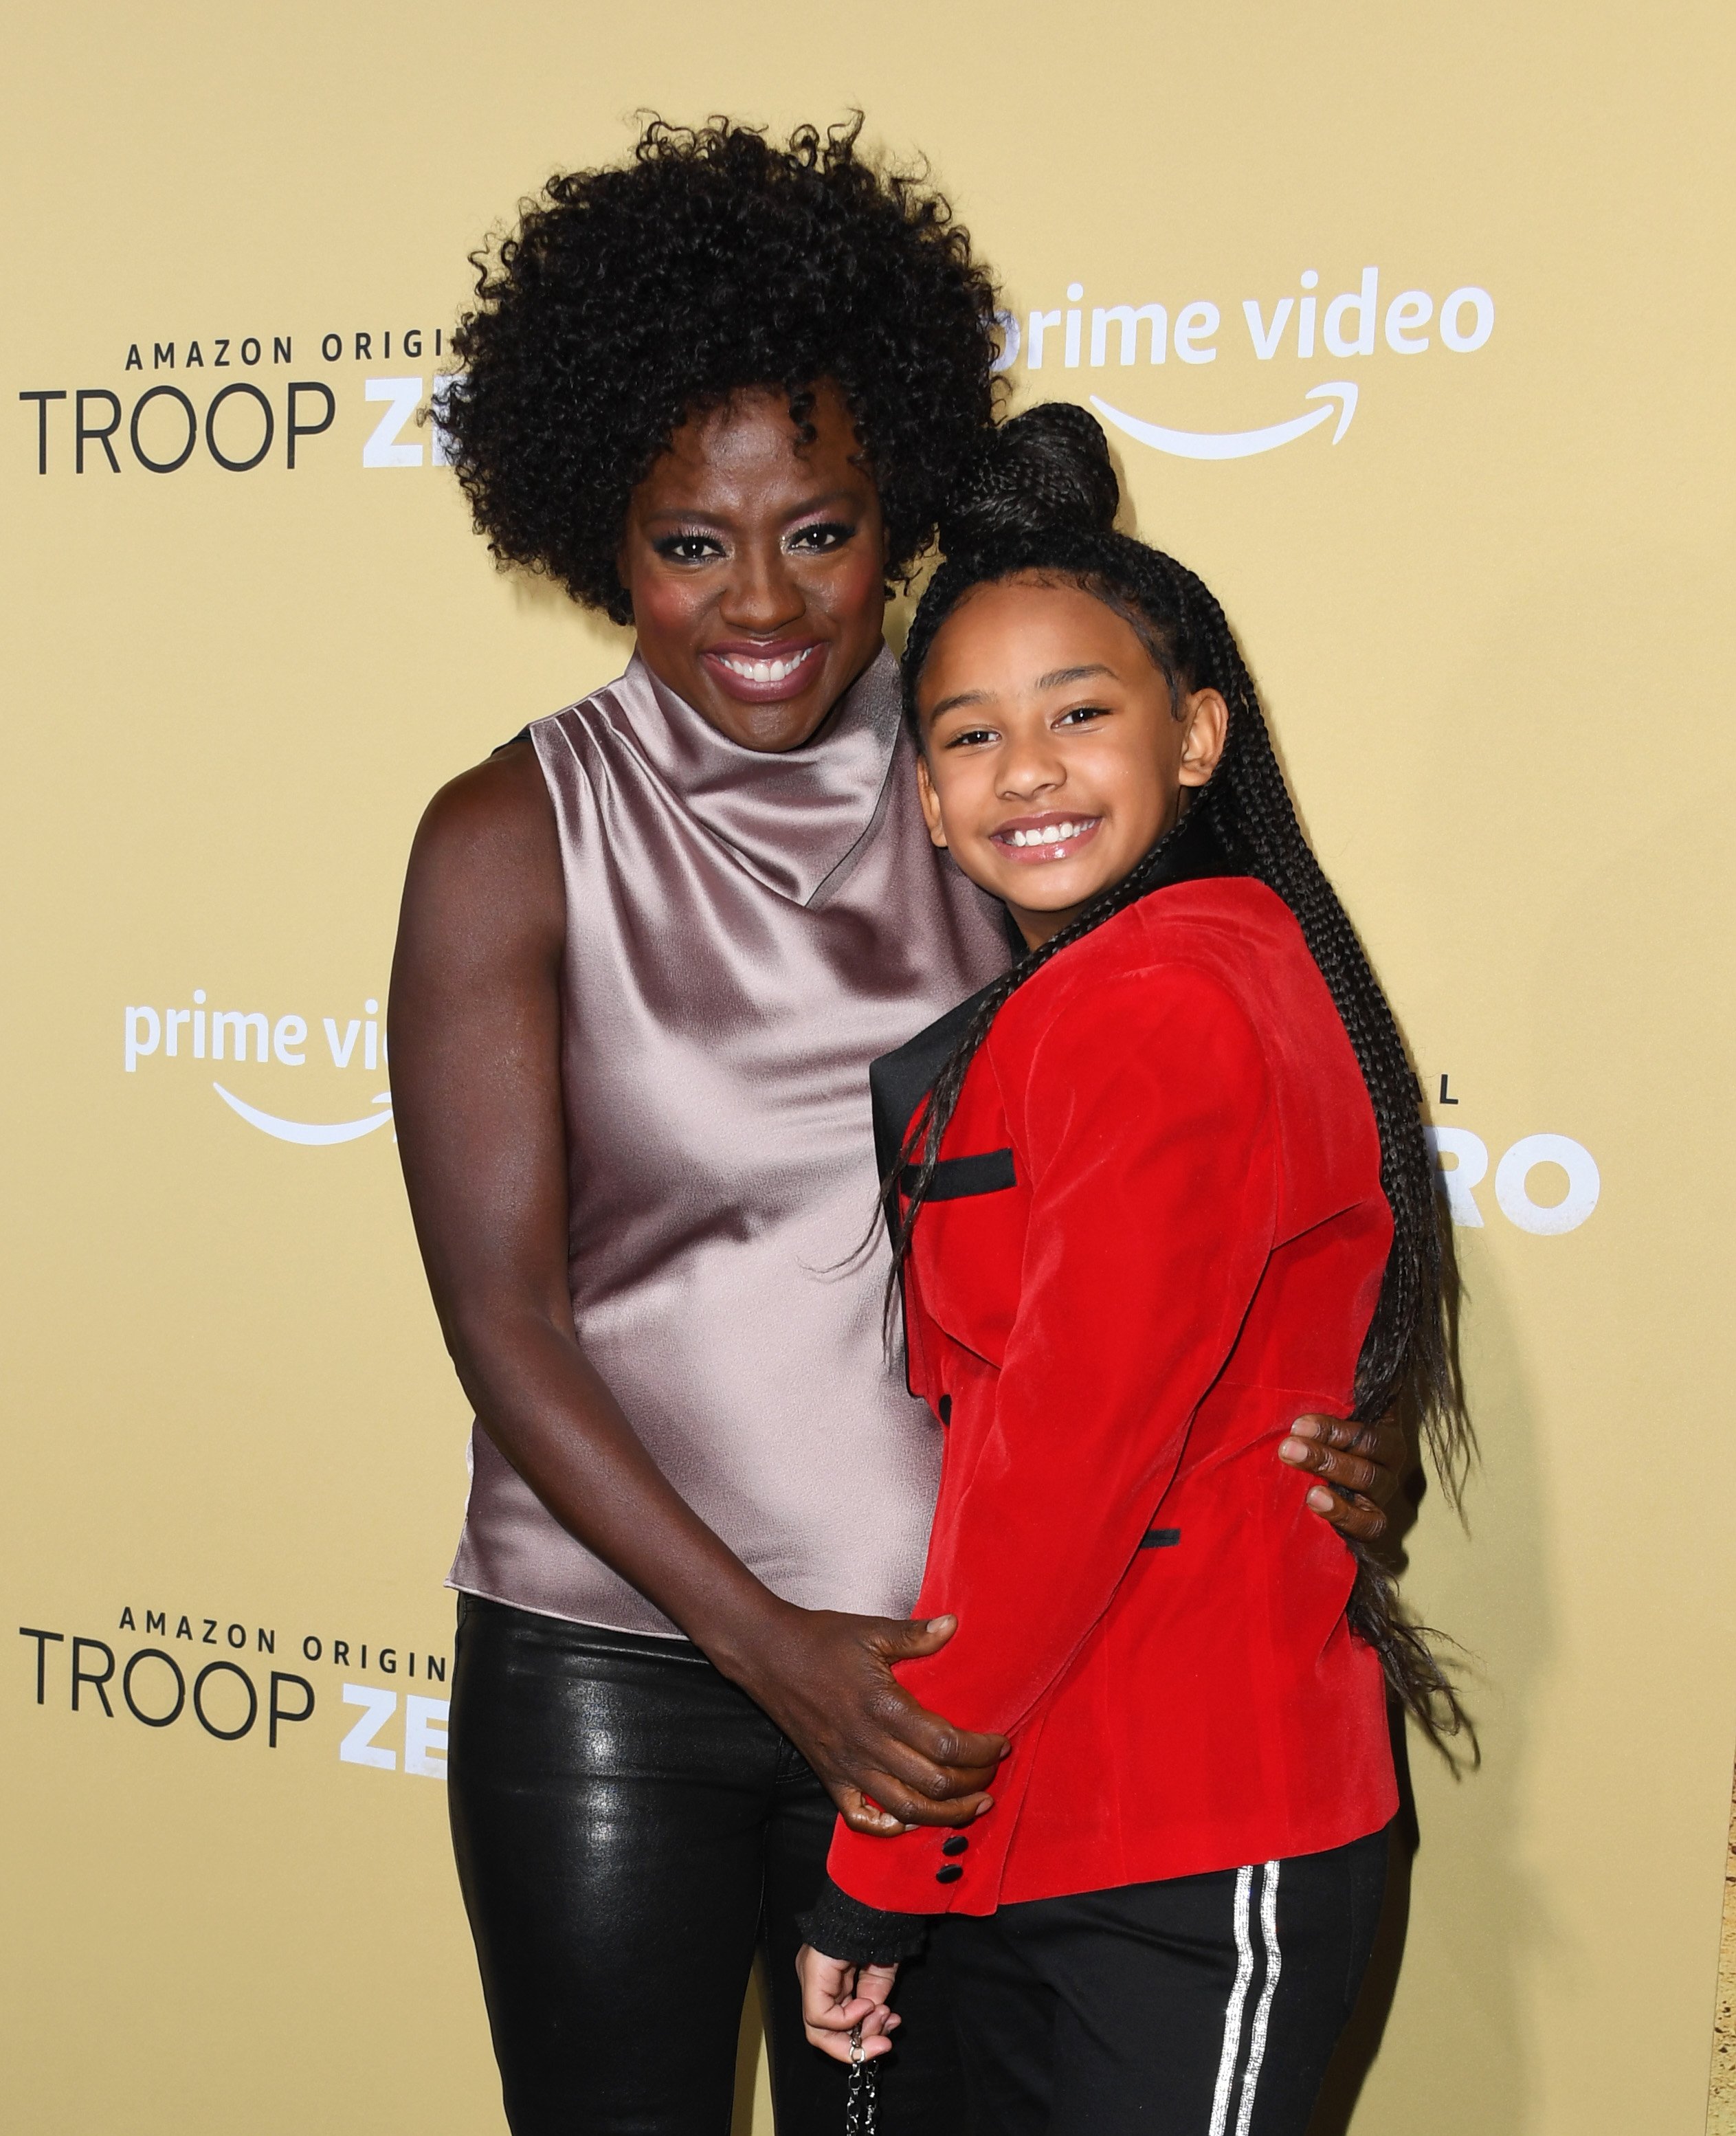 Viola Davis and daughter Genesis attends the premiere of "Troop Zero" in Los Angeles, California on January 13, 2020 | Photo: Getty Images